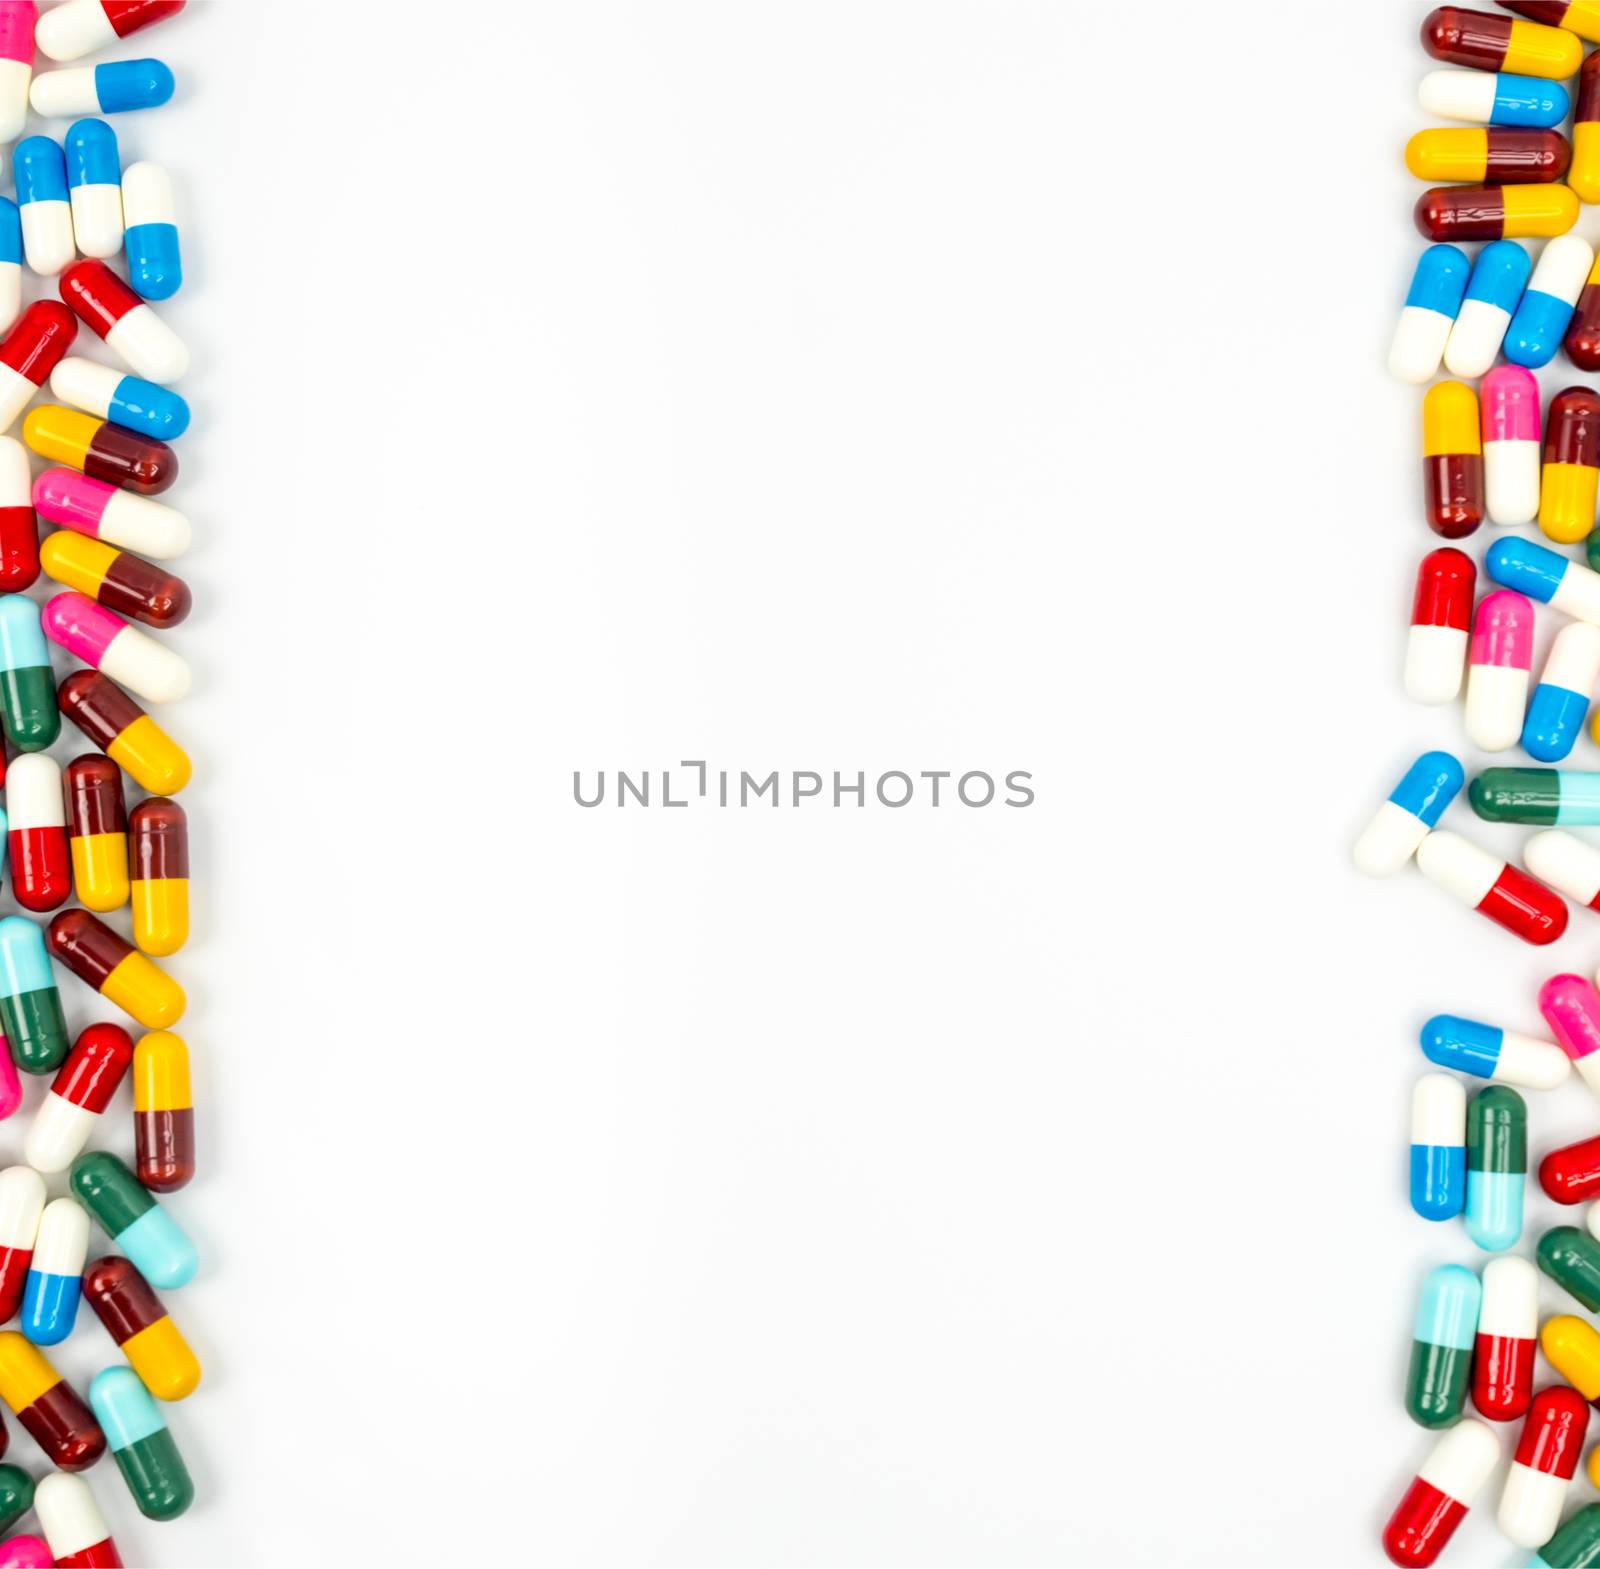 Colorful of antibiotic capsules pills isolated on white background with copy space. Drug resistance concept. Antibiotics drug use with reasonable and global healthcare concept. Capsule frame for education background. Pharmaceutical industry. Pharmacy background.